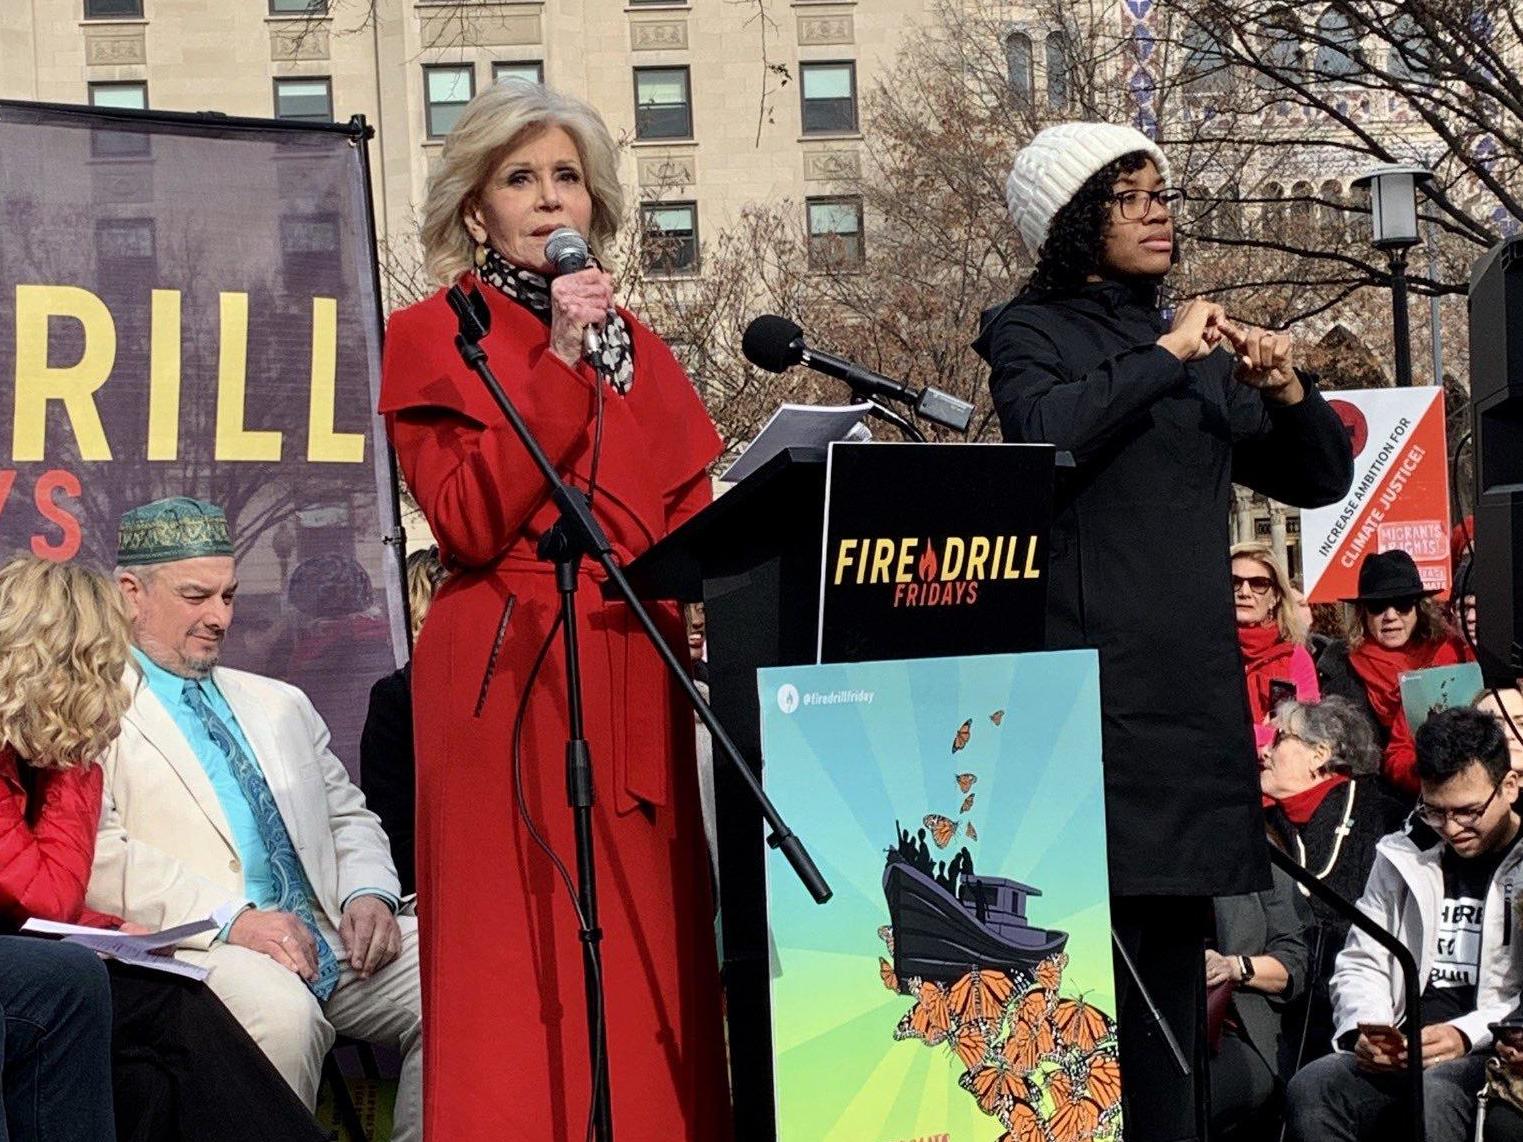 Jane Fonda is among those who reportedly attended protests in Washington on Friday